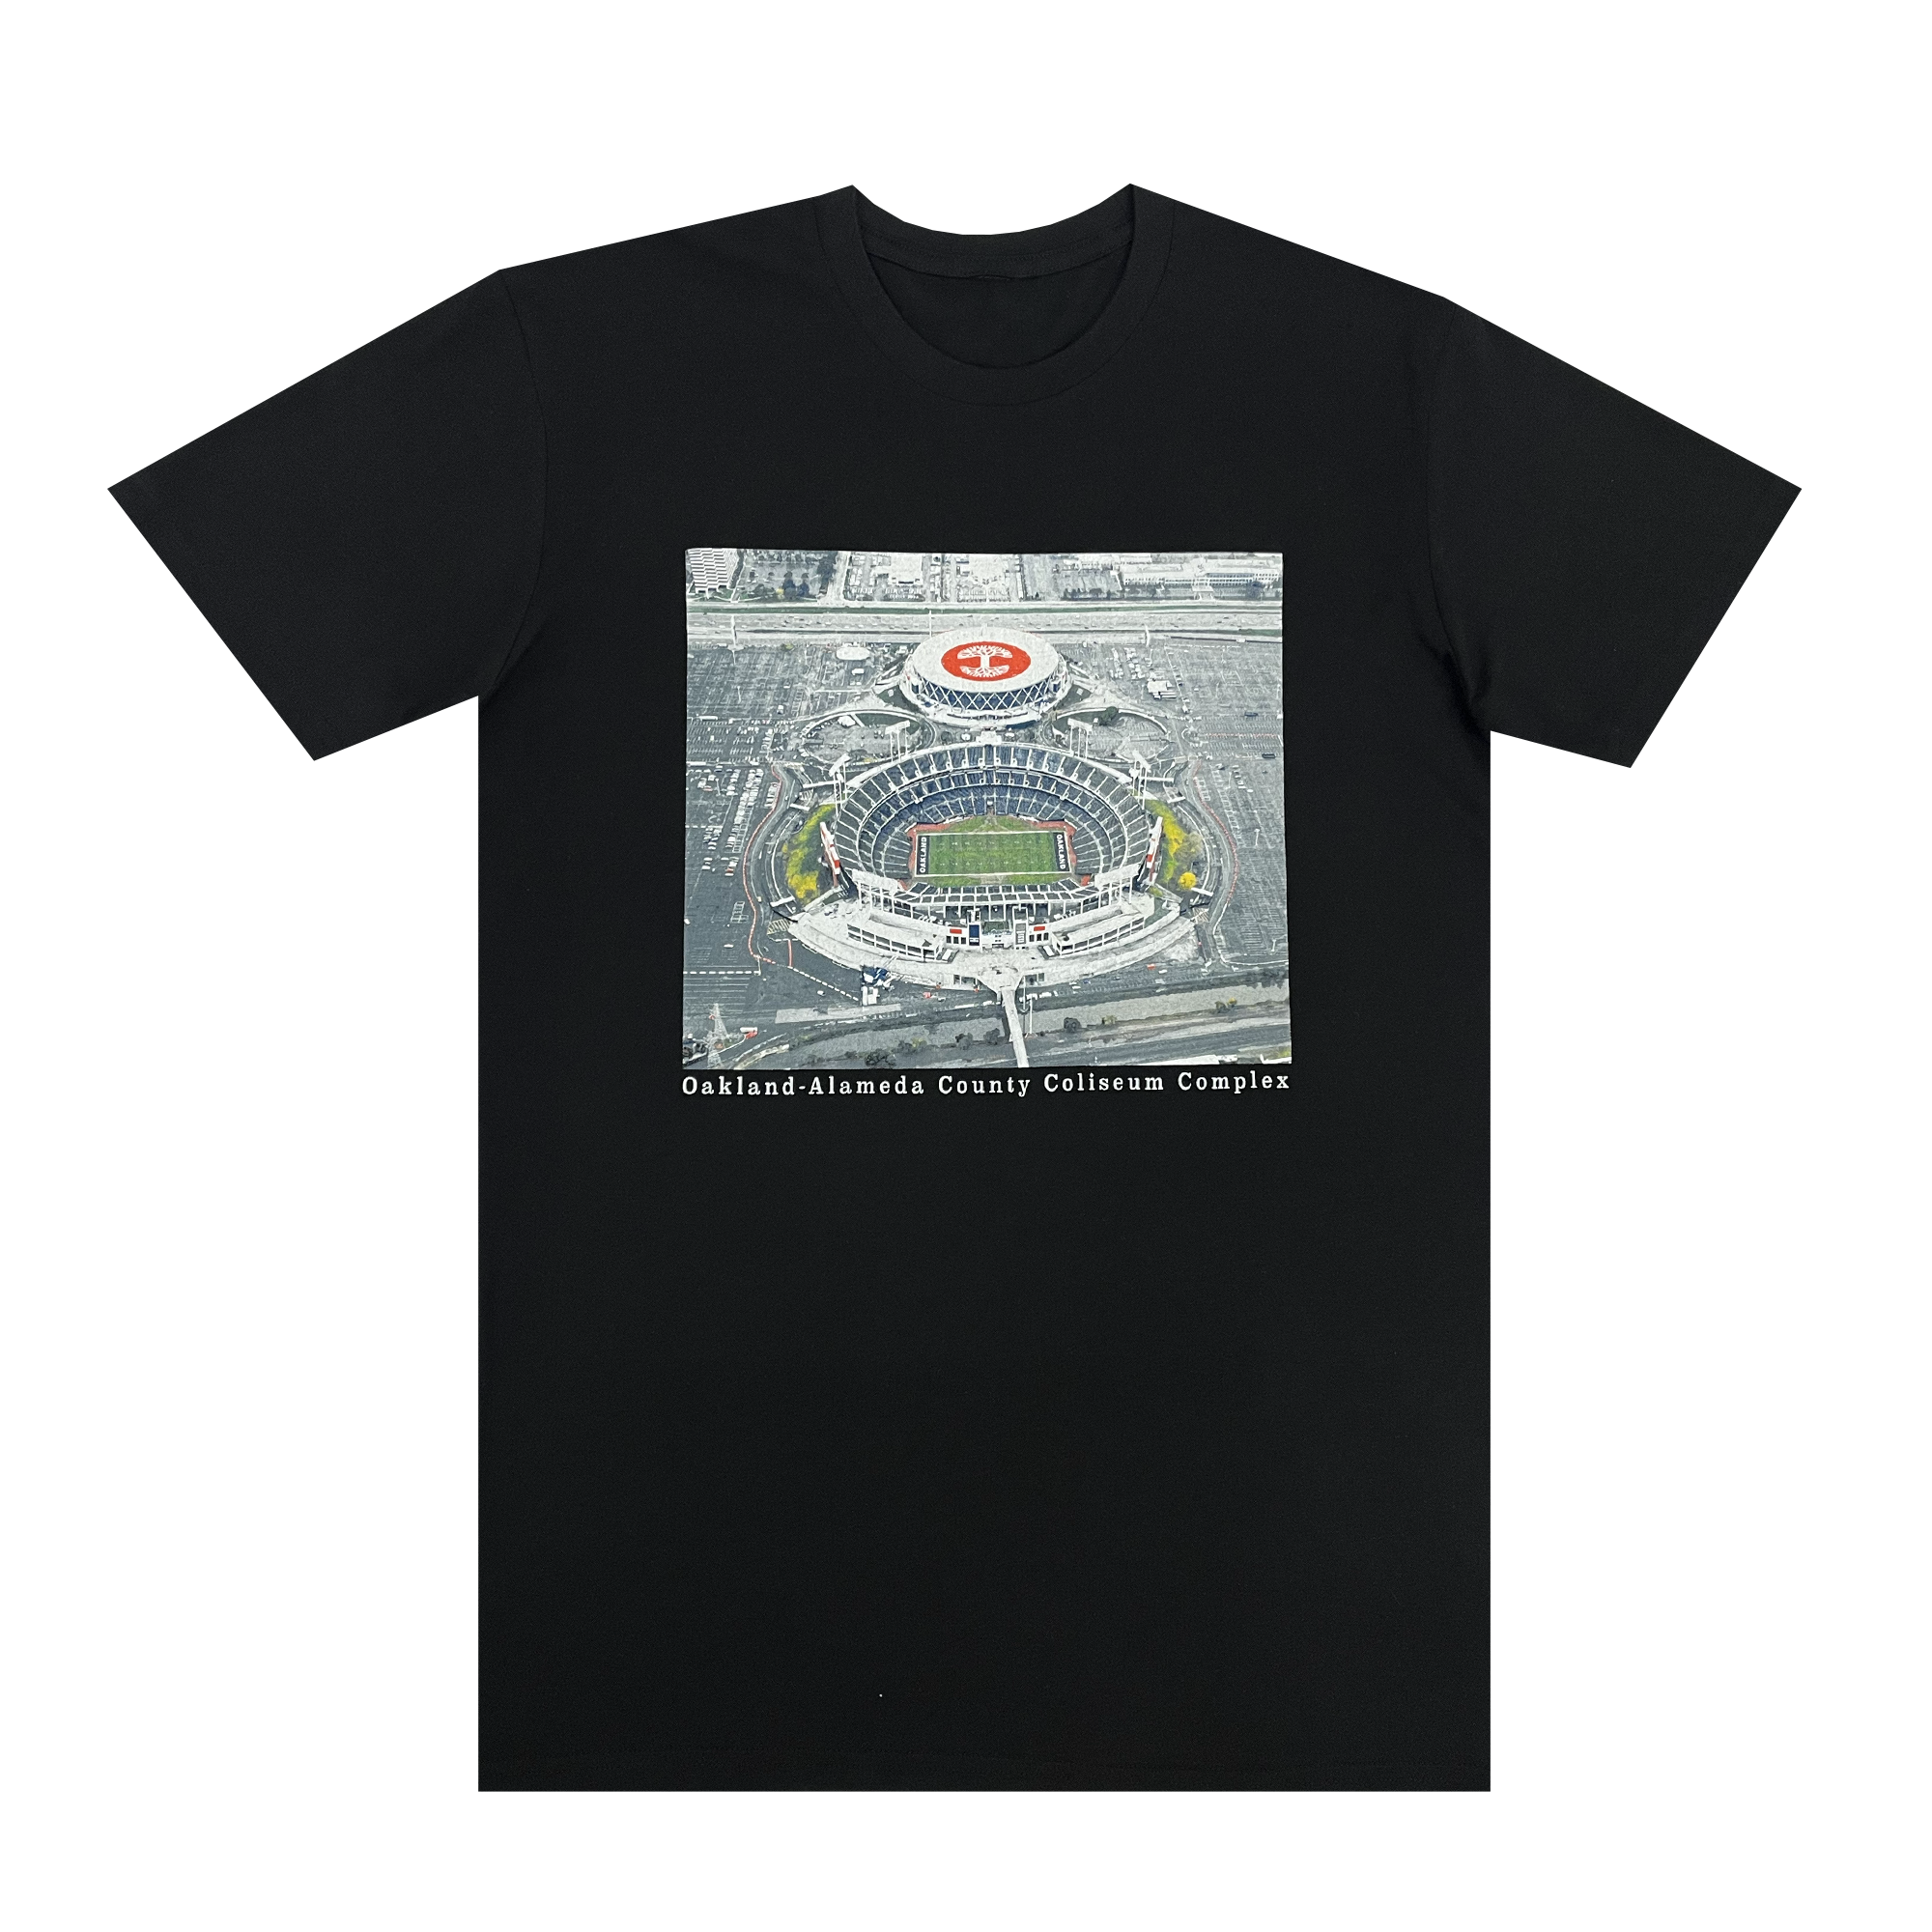 Black t-shirt with a picture of the Oakland Alameda County Coliseum Complex on front chest.